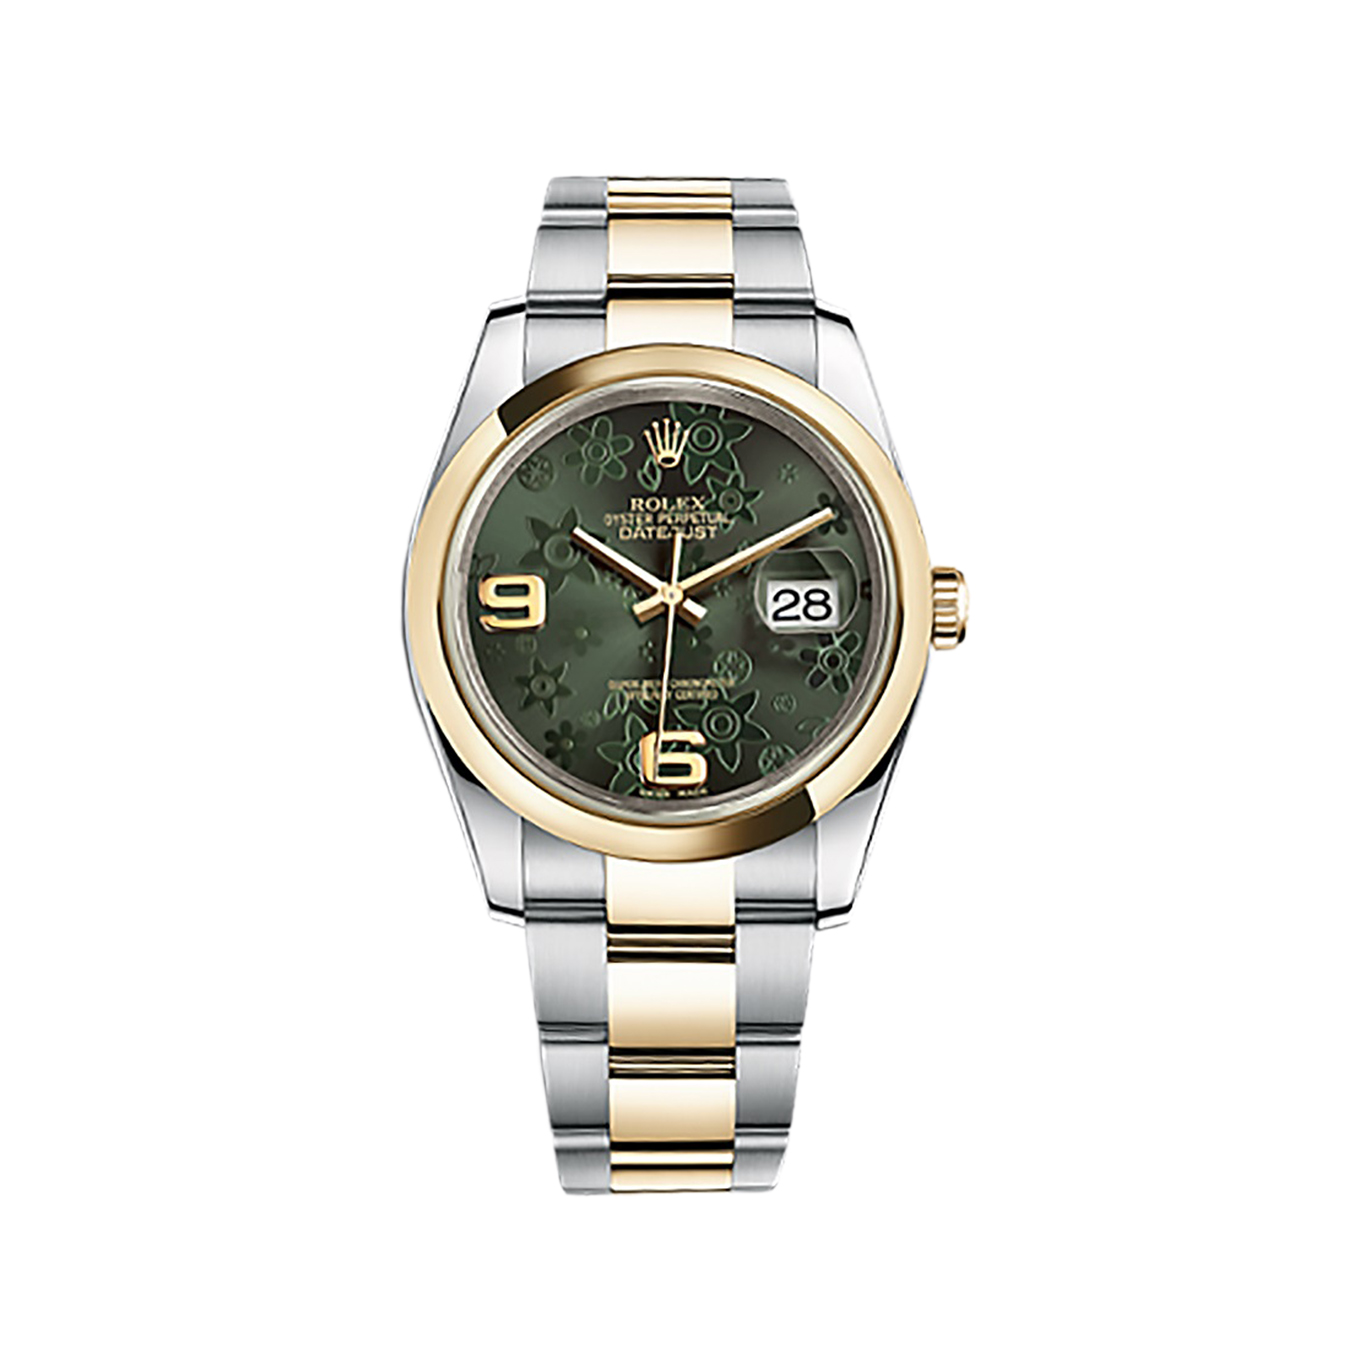 Datejust 36 116203 Gold & Stainless Steel Watch (Green Floral Motif)